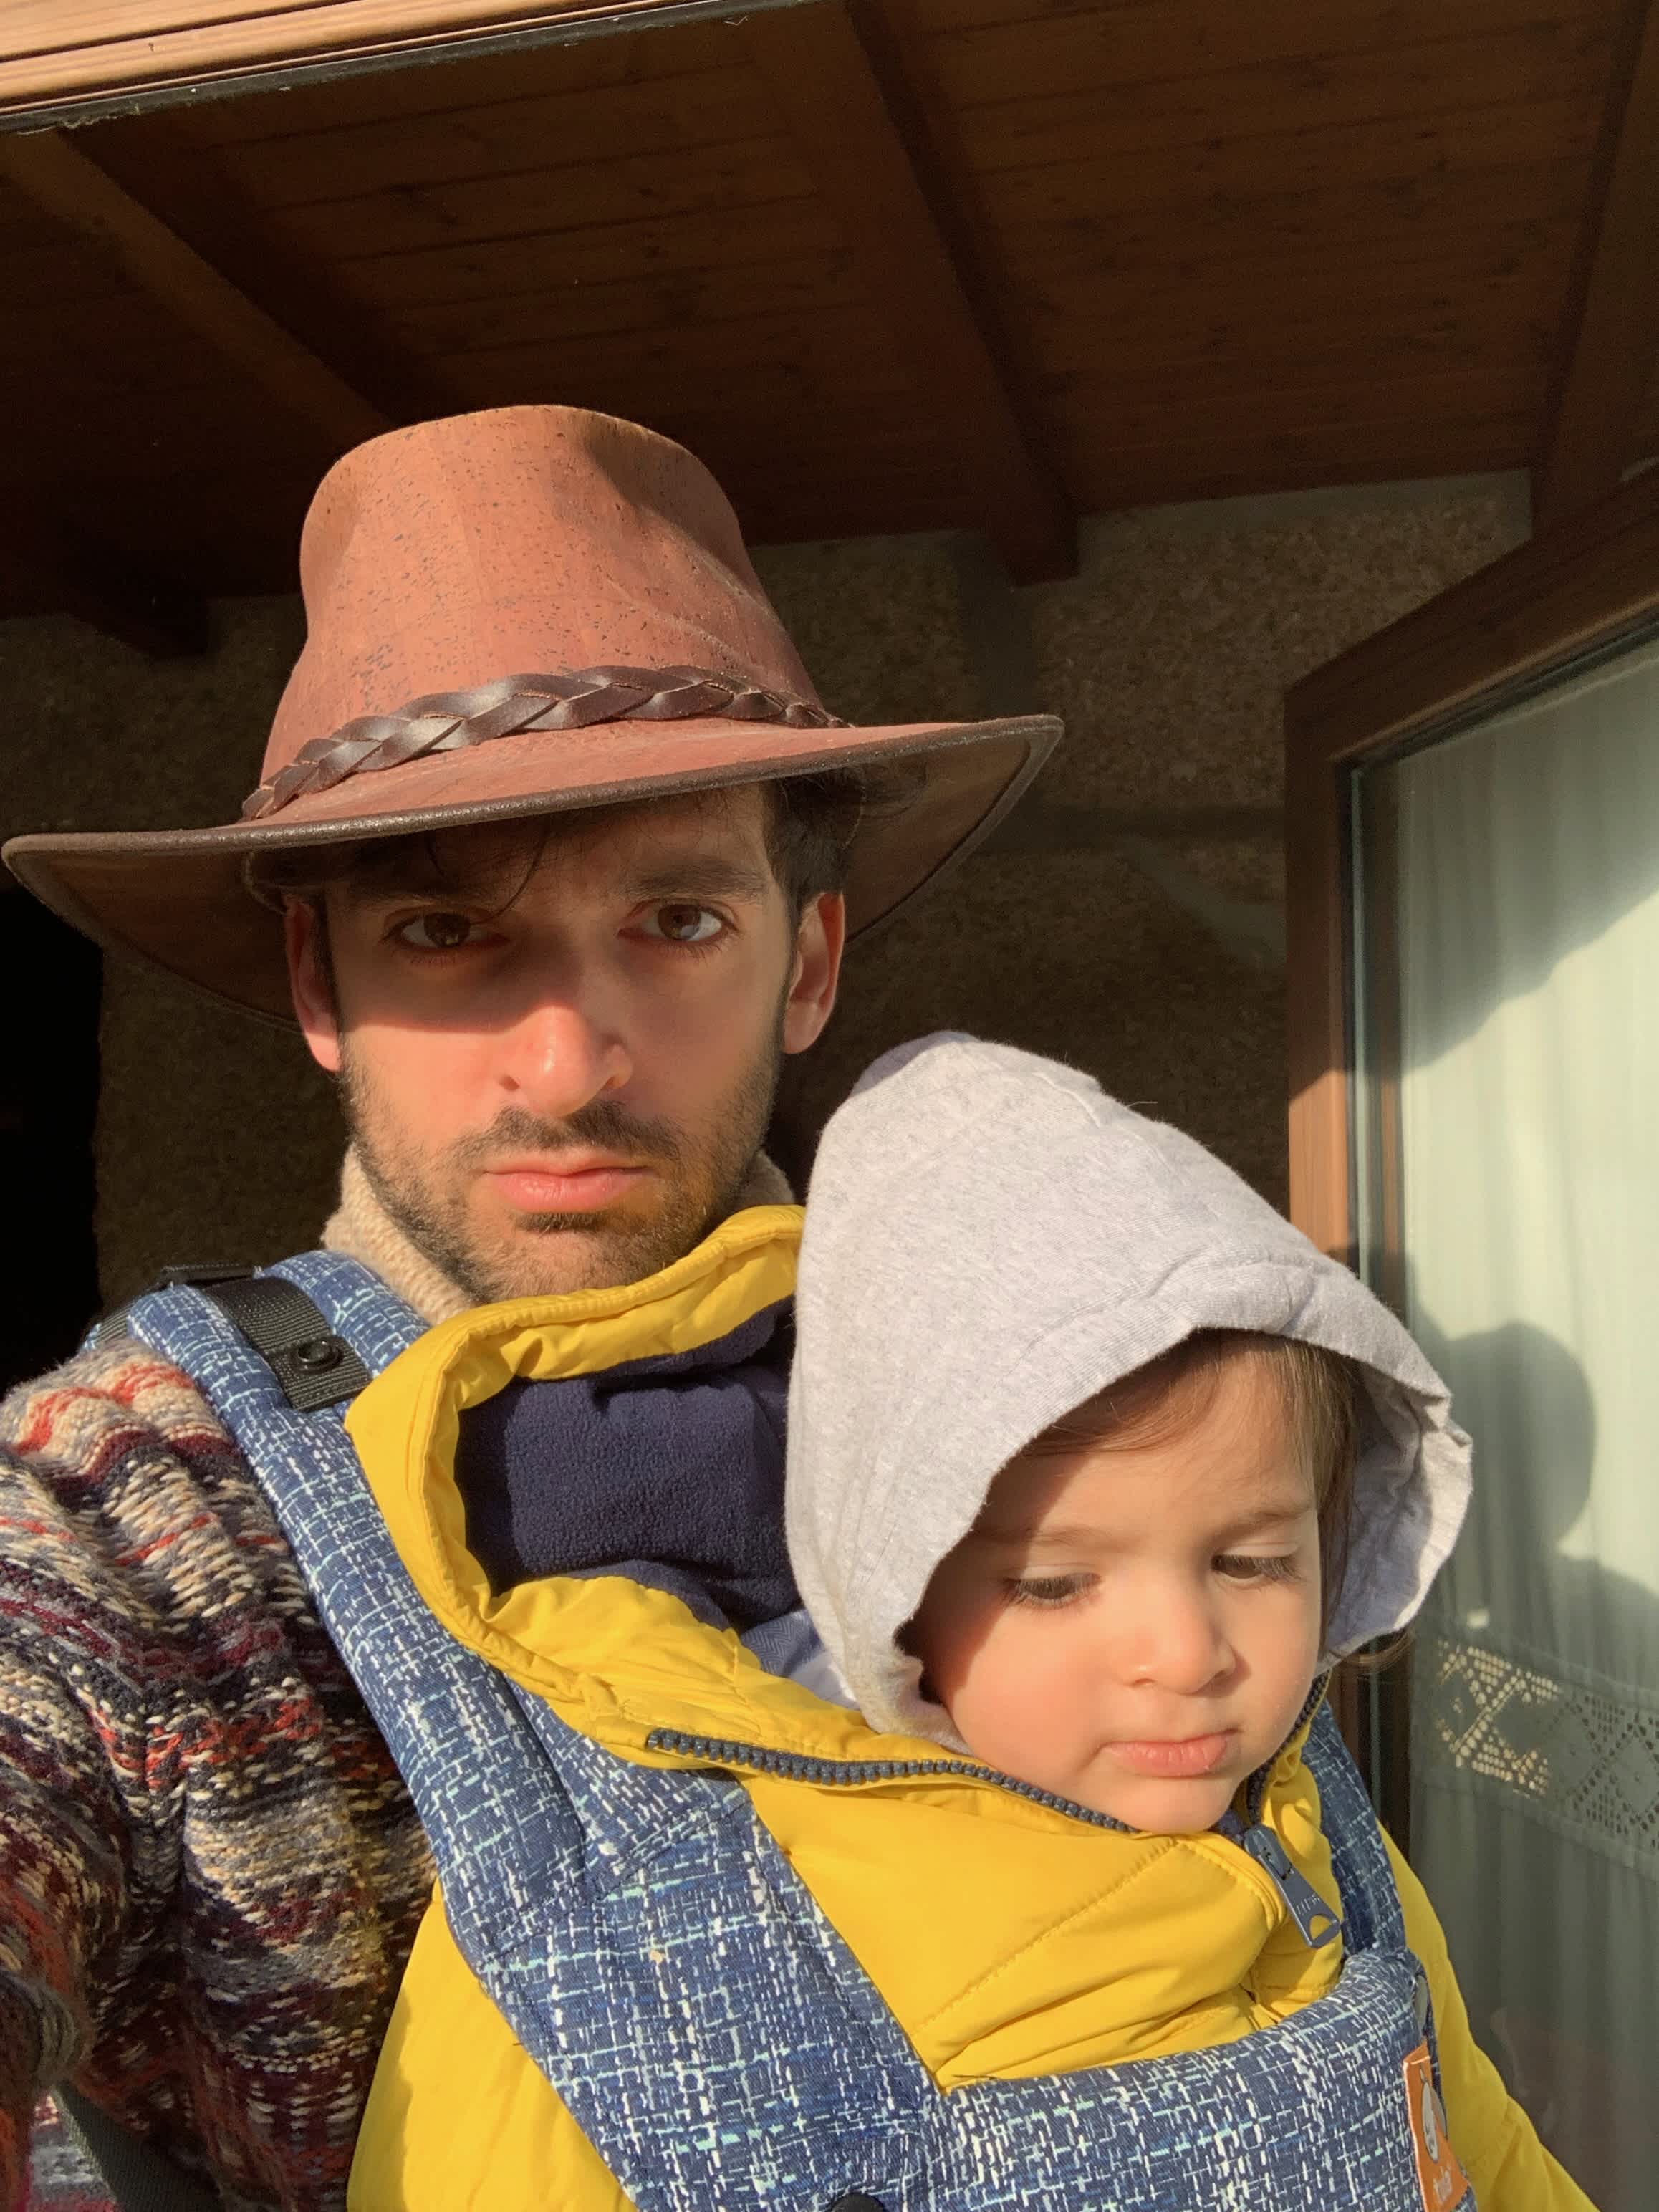 Diogo with son and wearing a hat